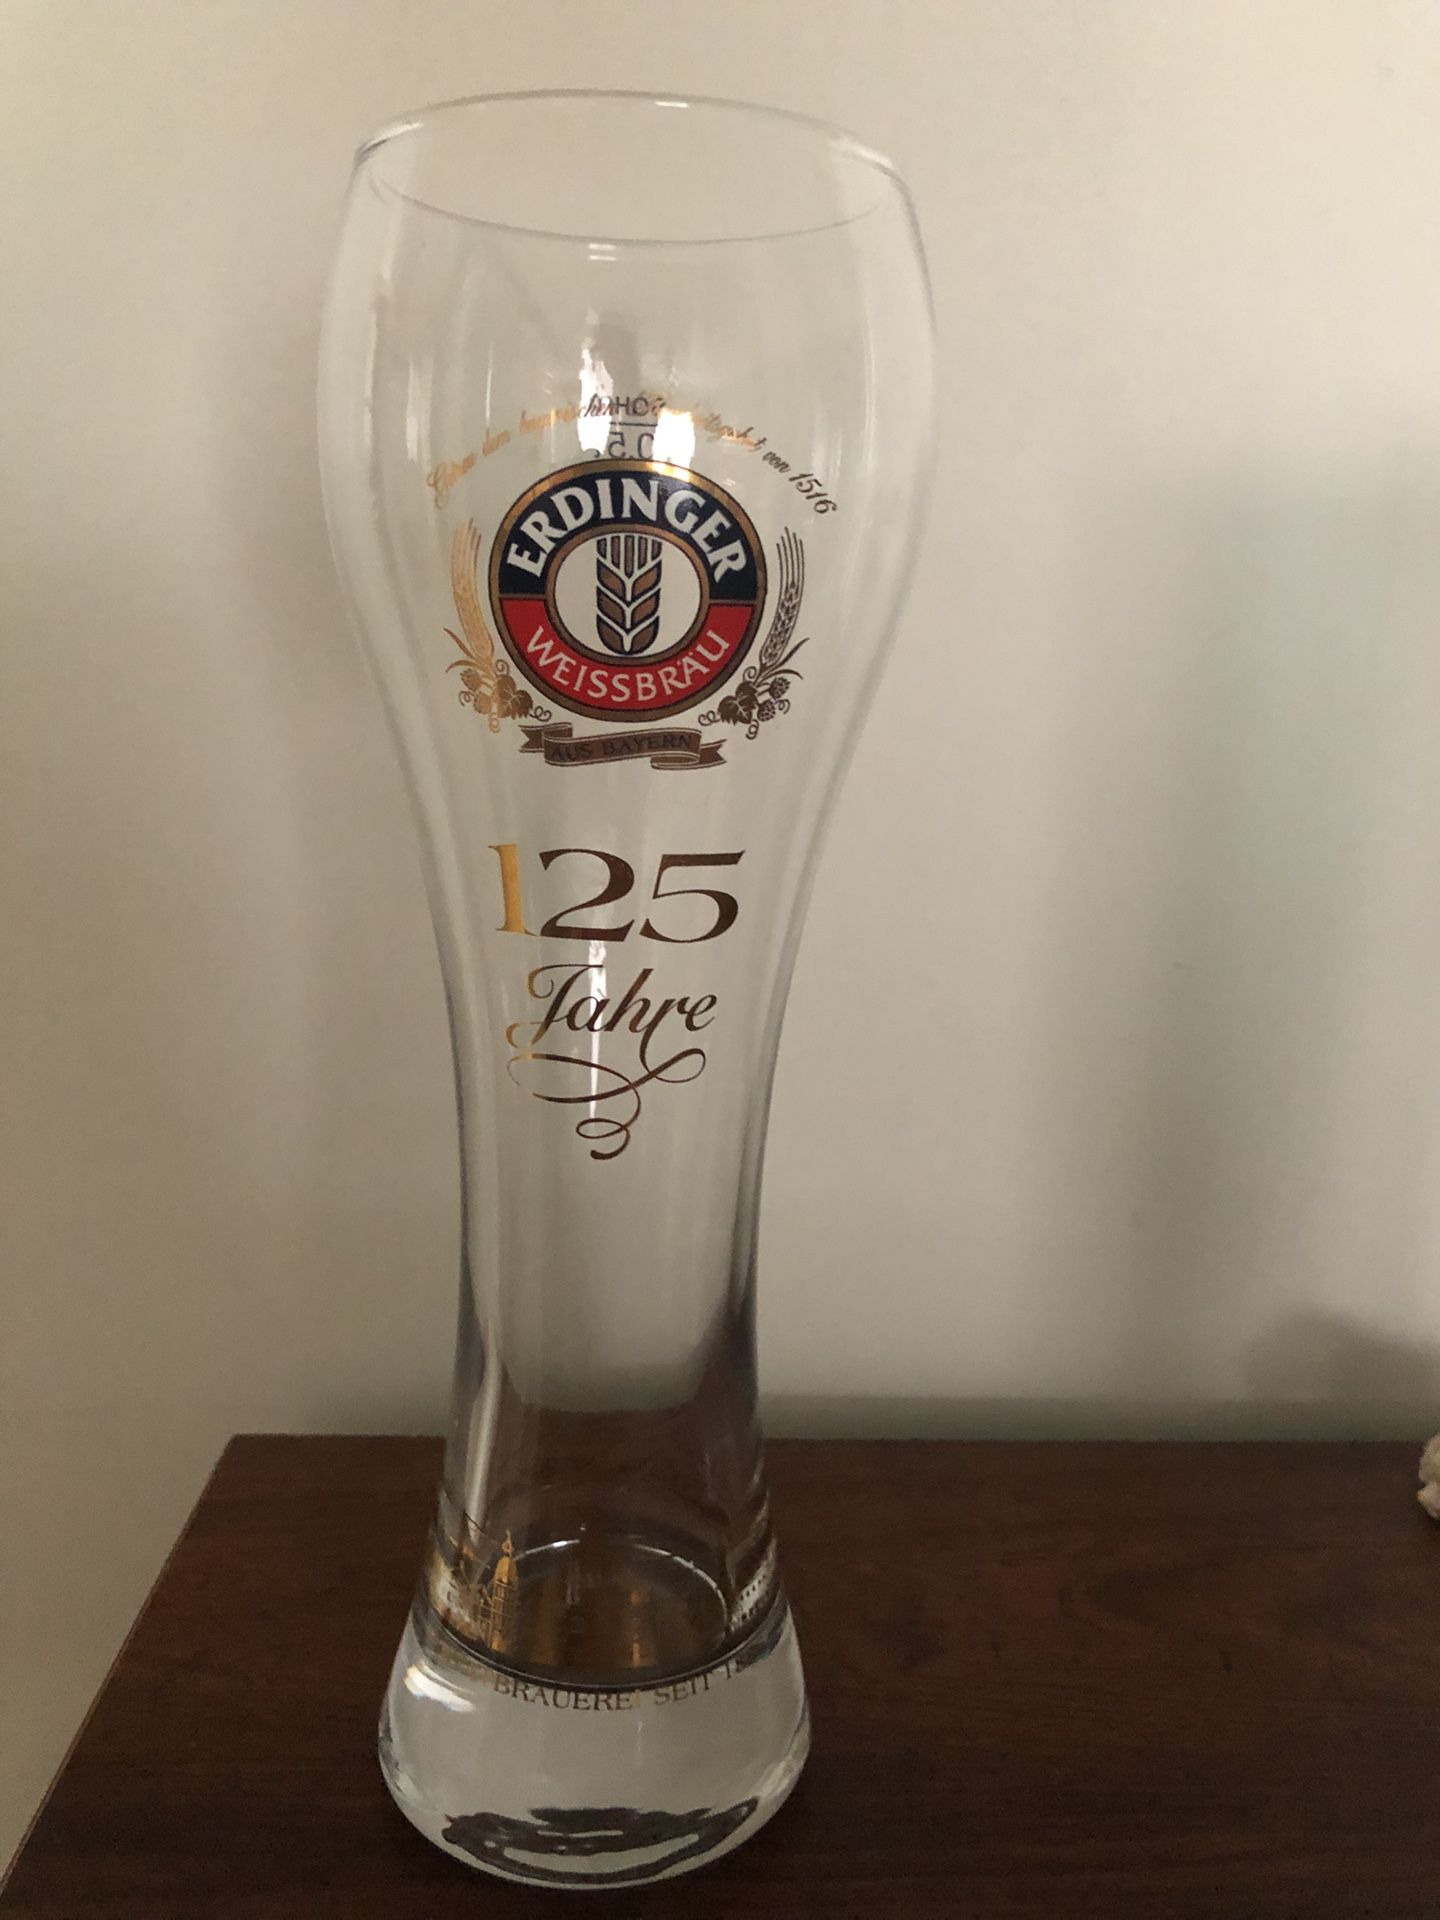 Collectible beer glass